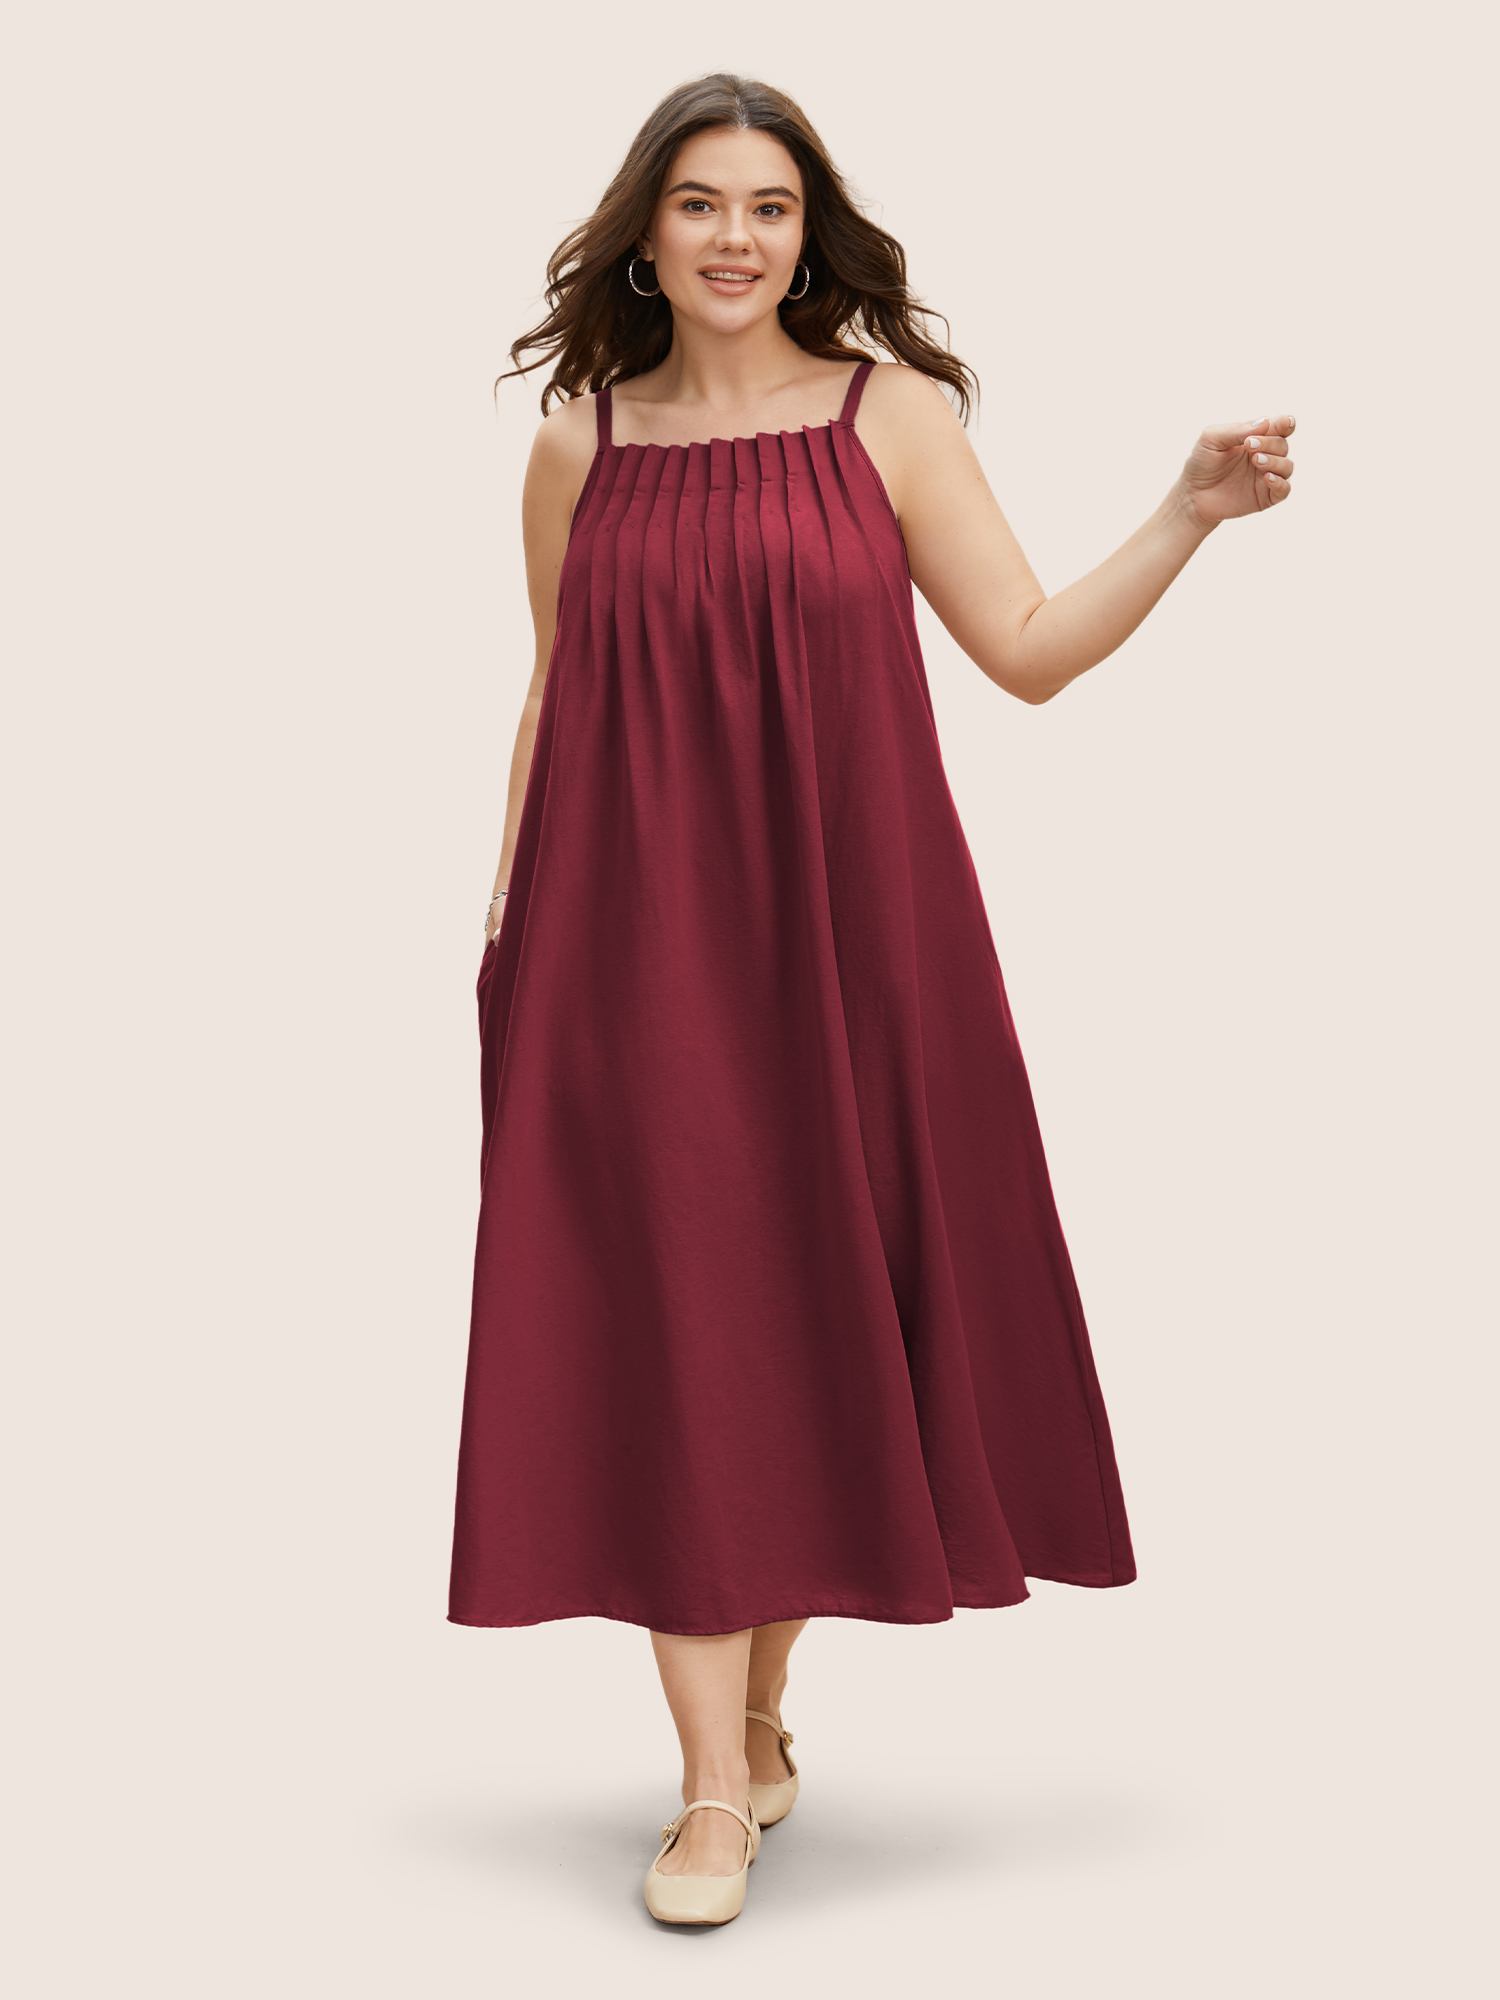 

Plus Size Cotton Plain Pleated Loose Fit Cami Dress RedViolet Women Casual Ruffles Non Sleeveless Curvy BloomChic